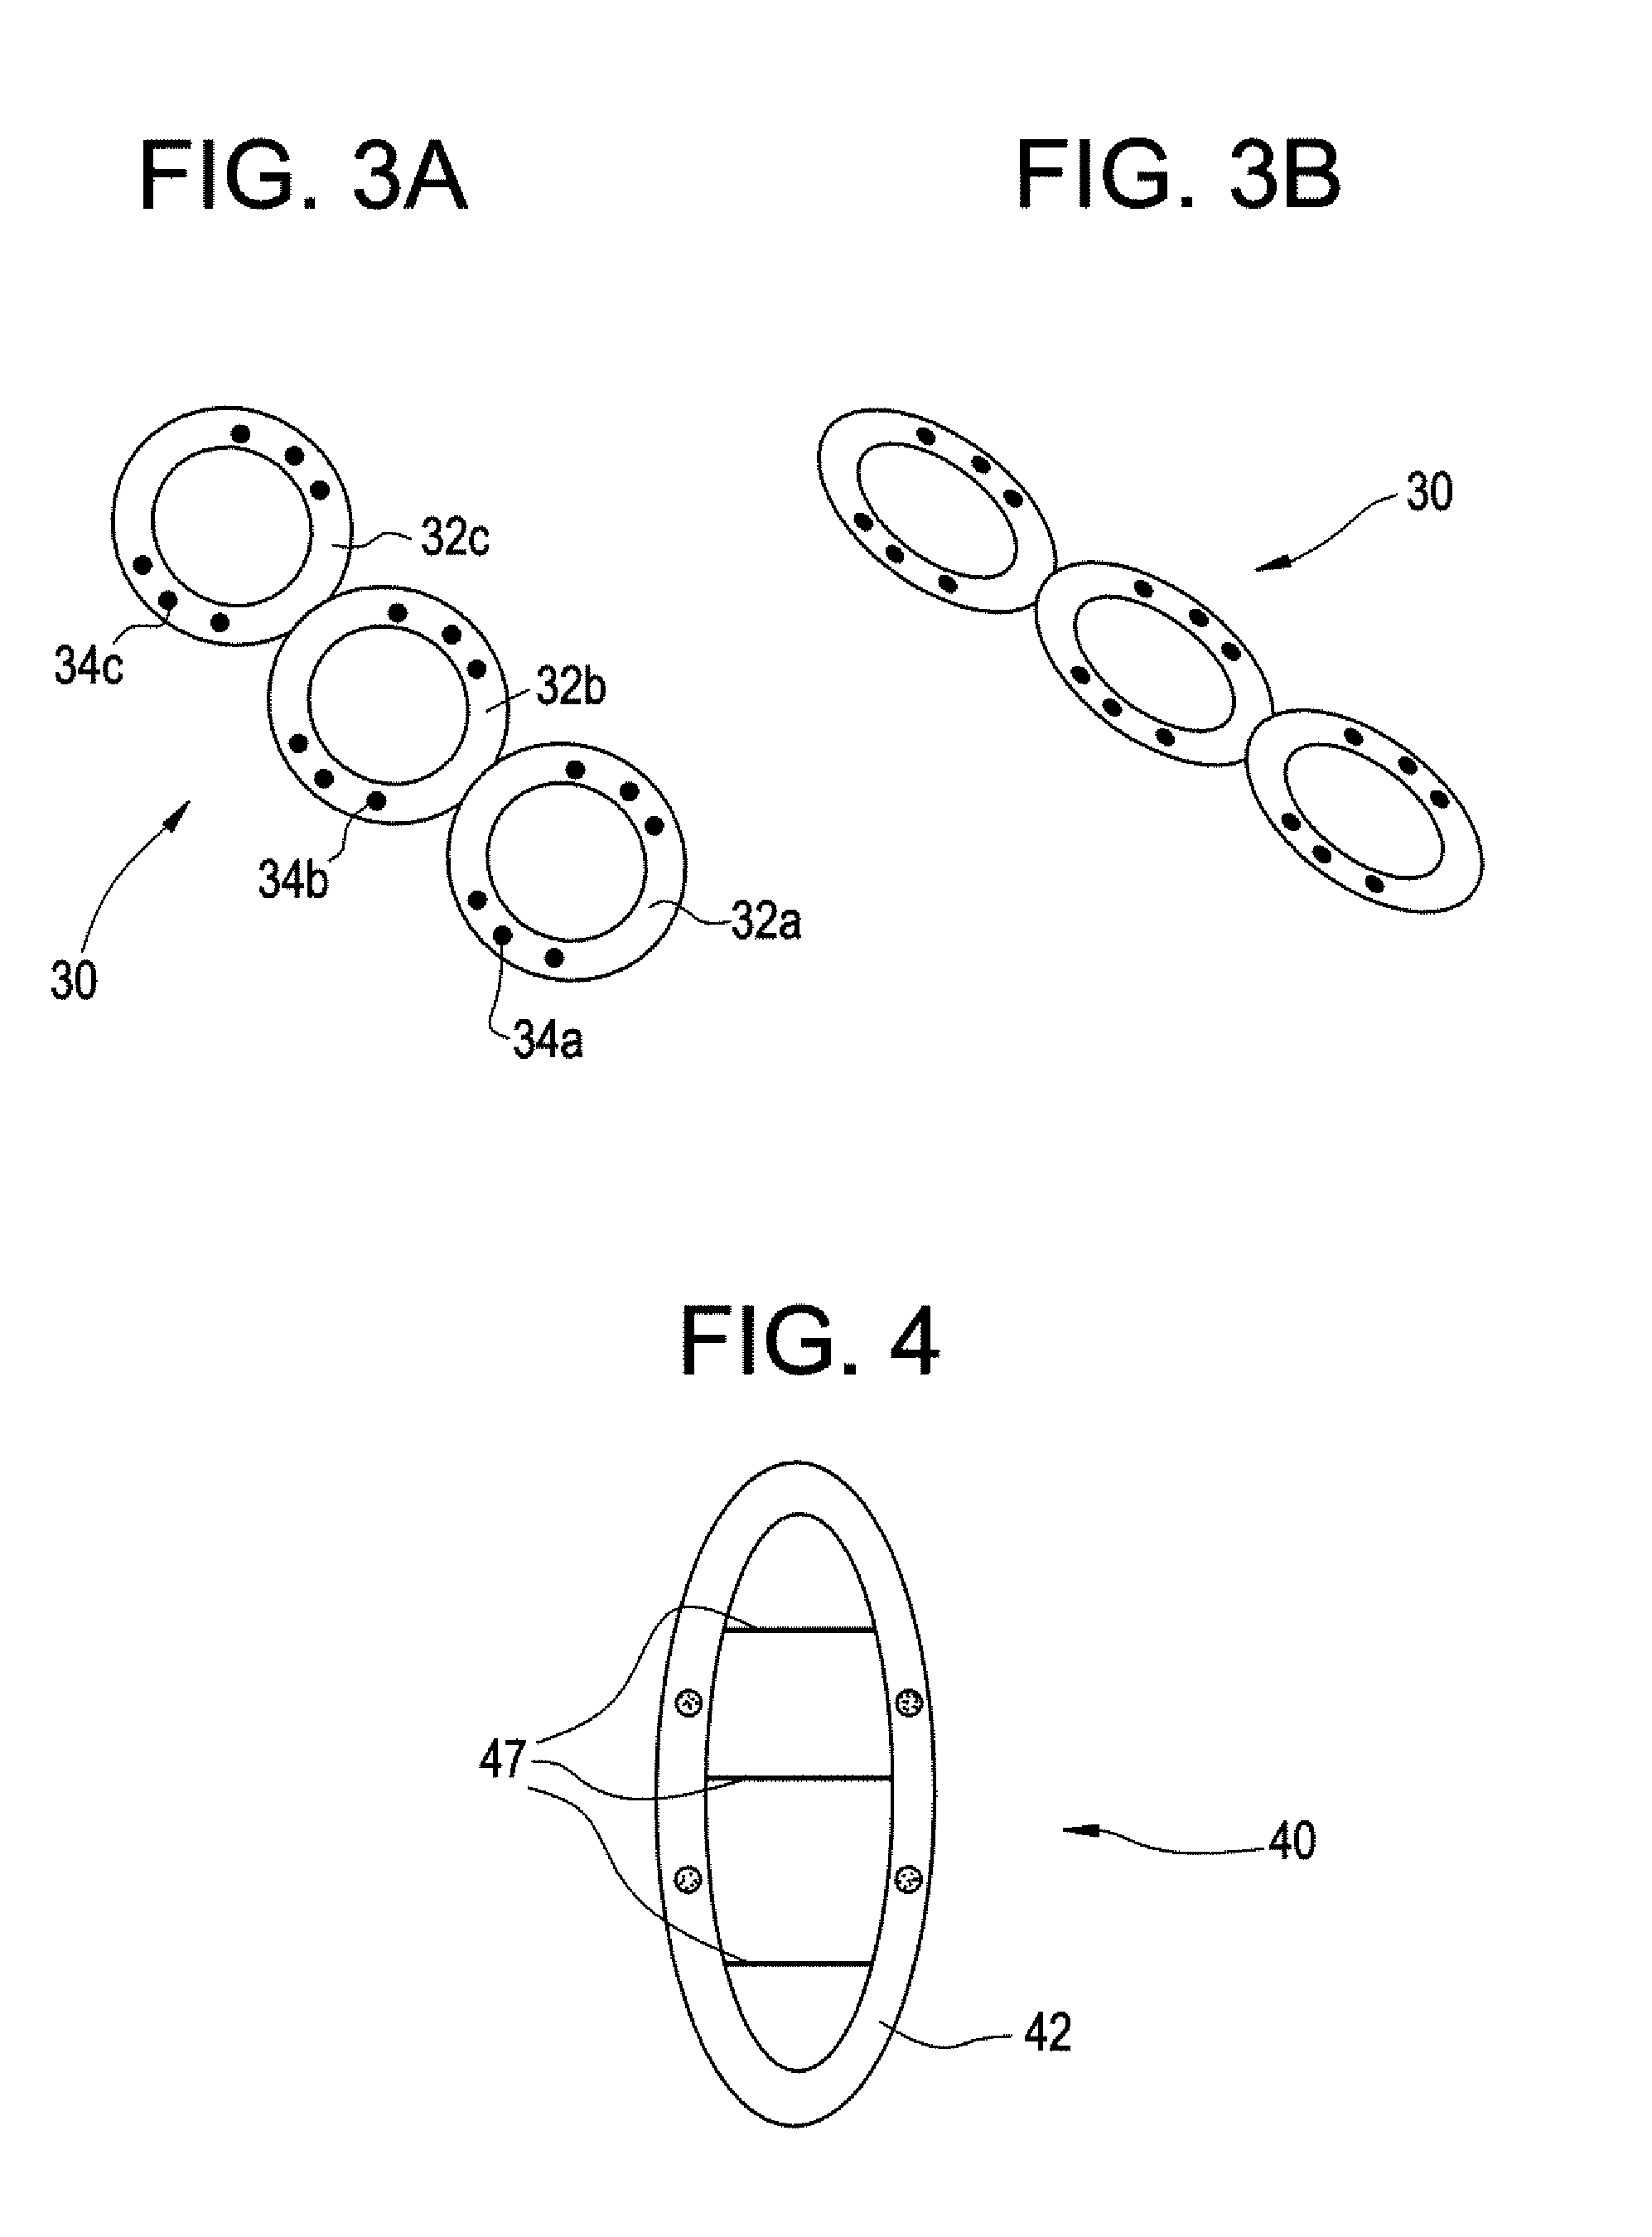 Intravesical drug delivery device and method